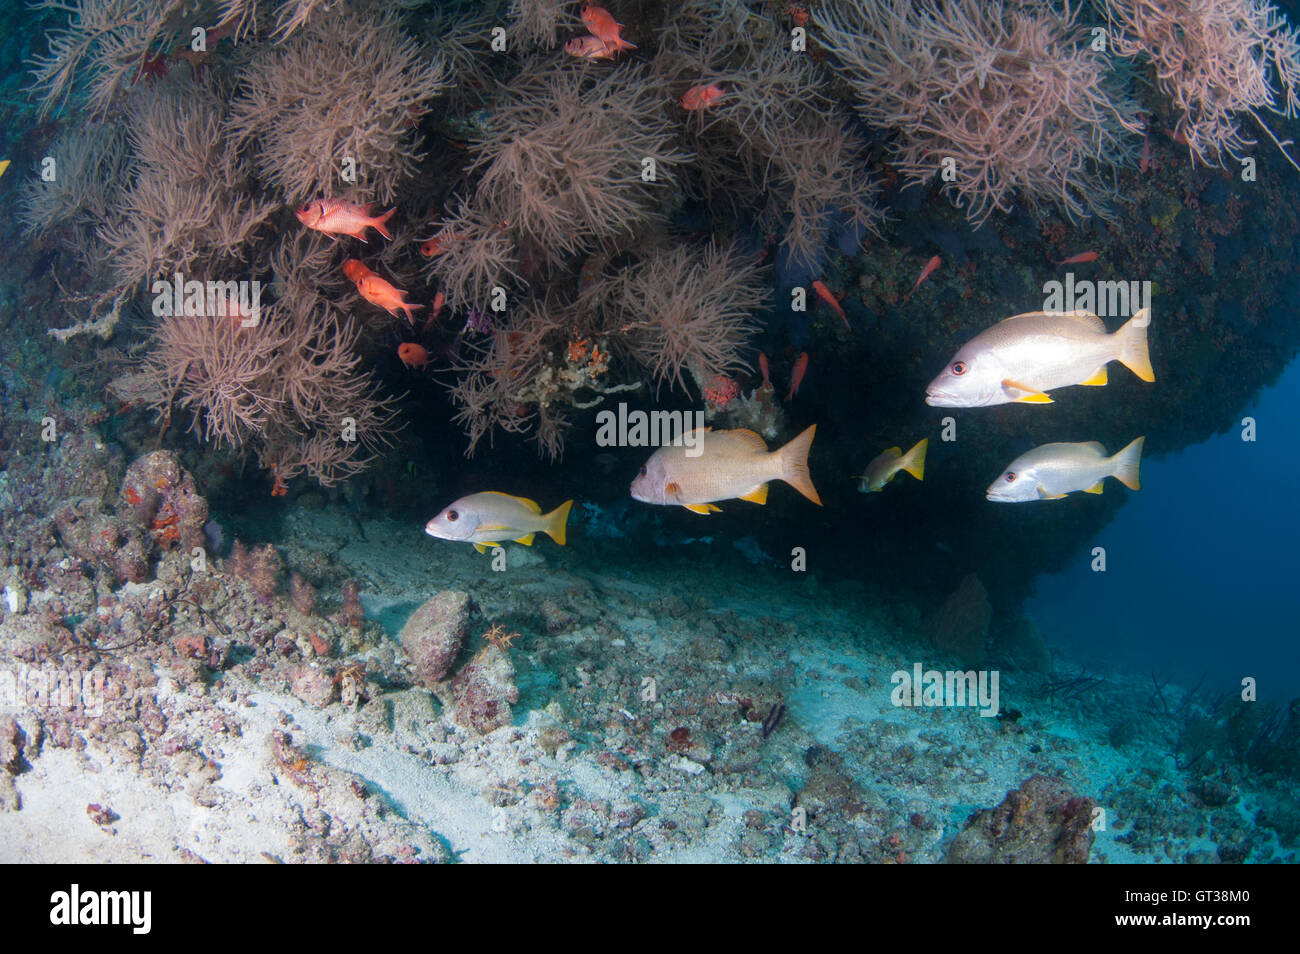 Snappers hanging under an overhang with black corals Stock Photo